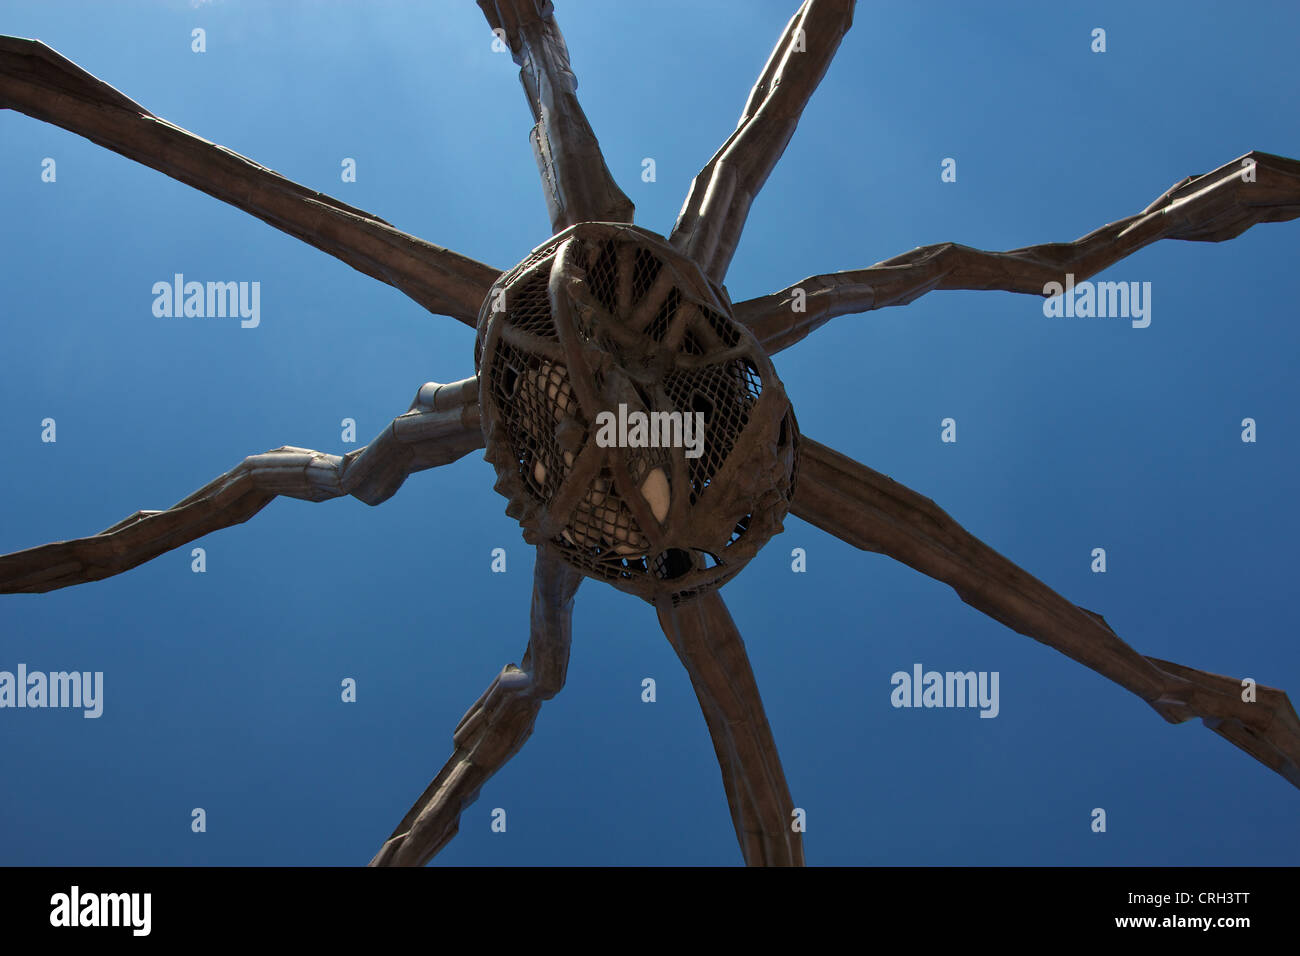 Louise Bourgeois' famous spider sculpture "Maman" outside the Kunsthalle art museum in Hamburg, Germany. Stock Photo